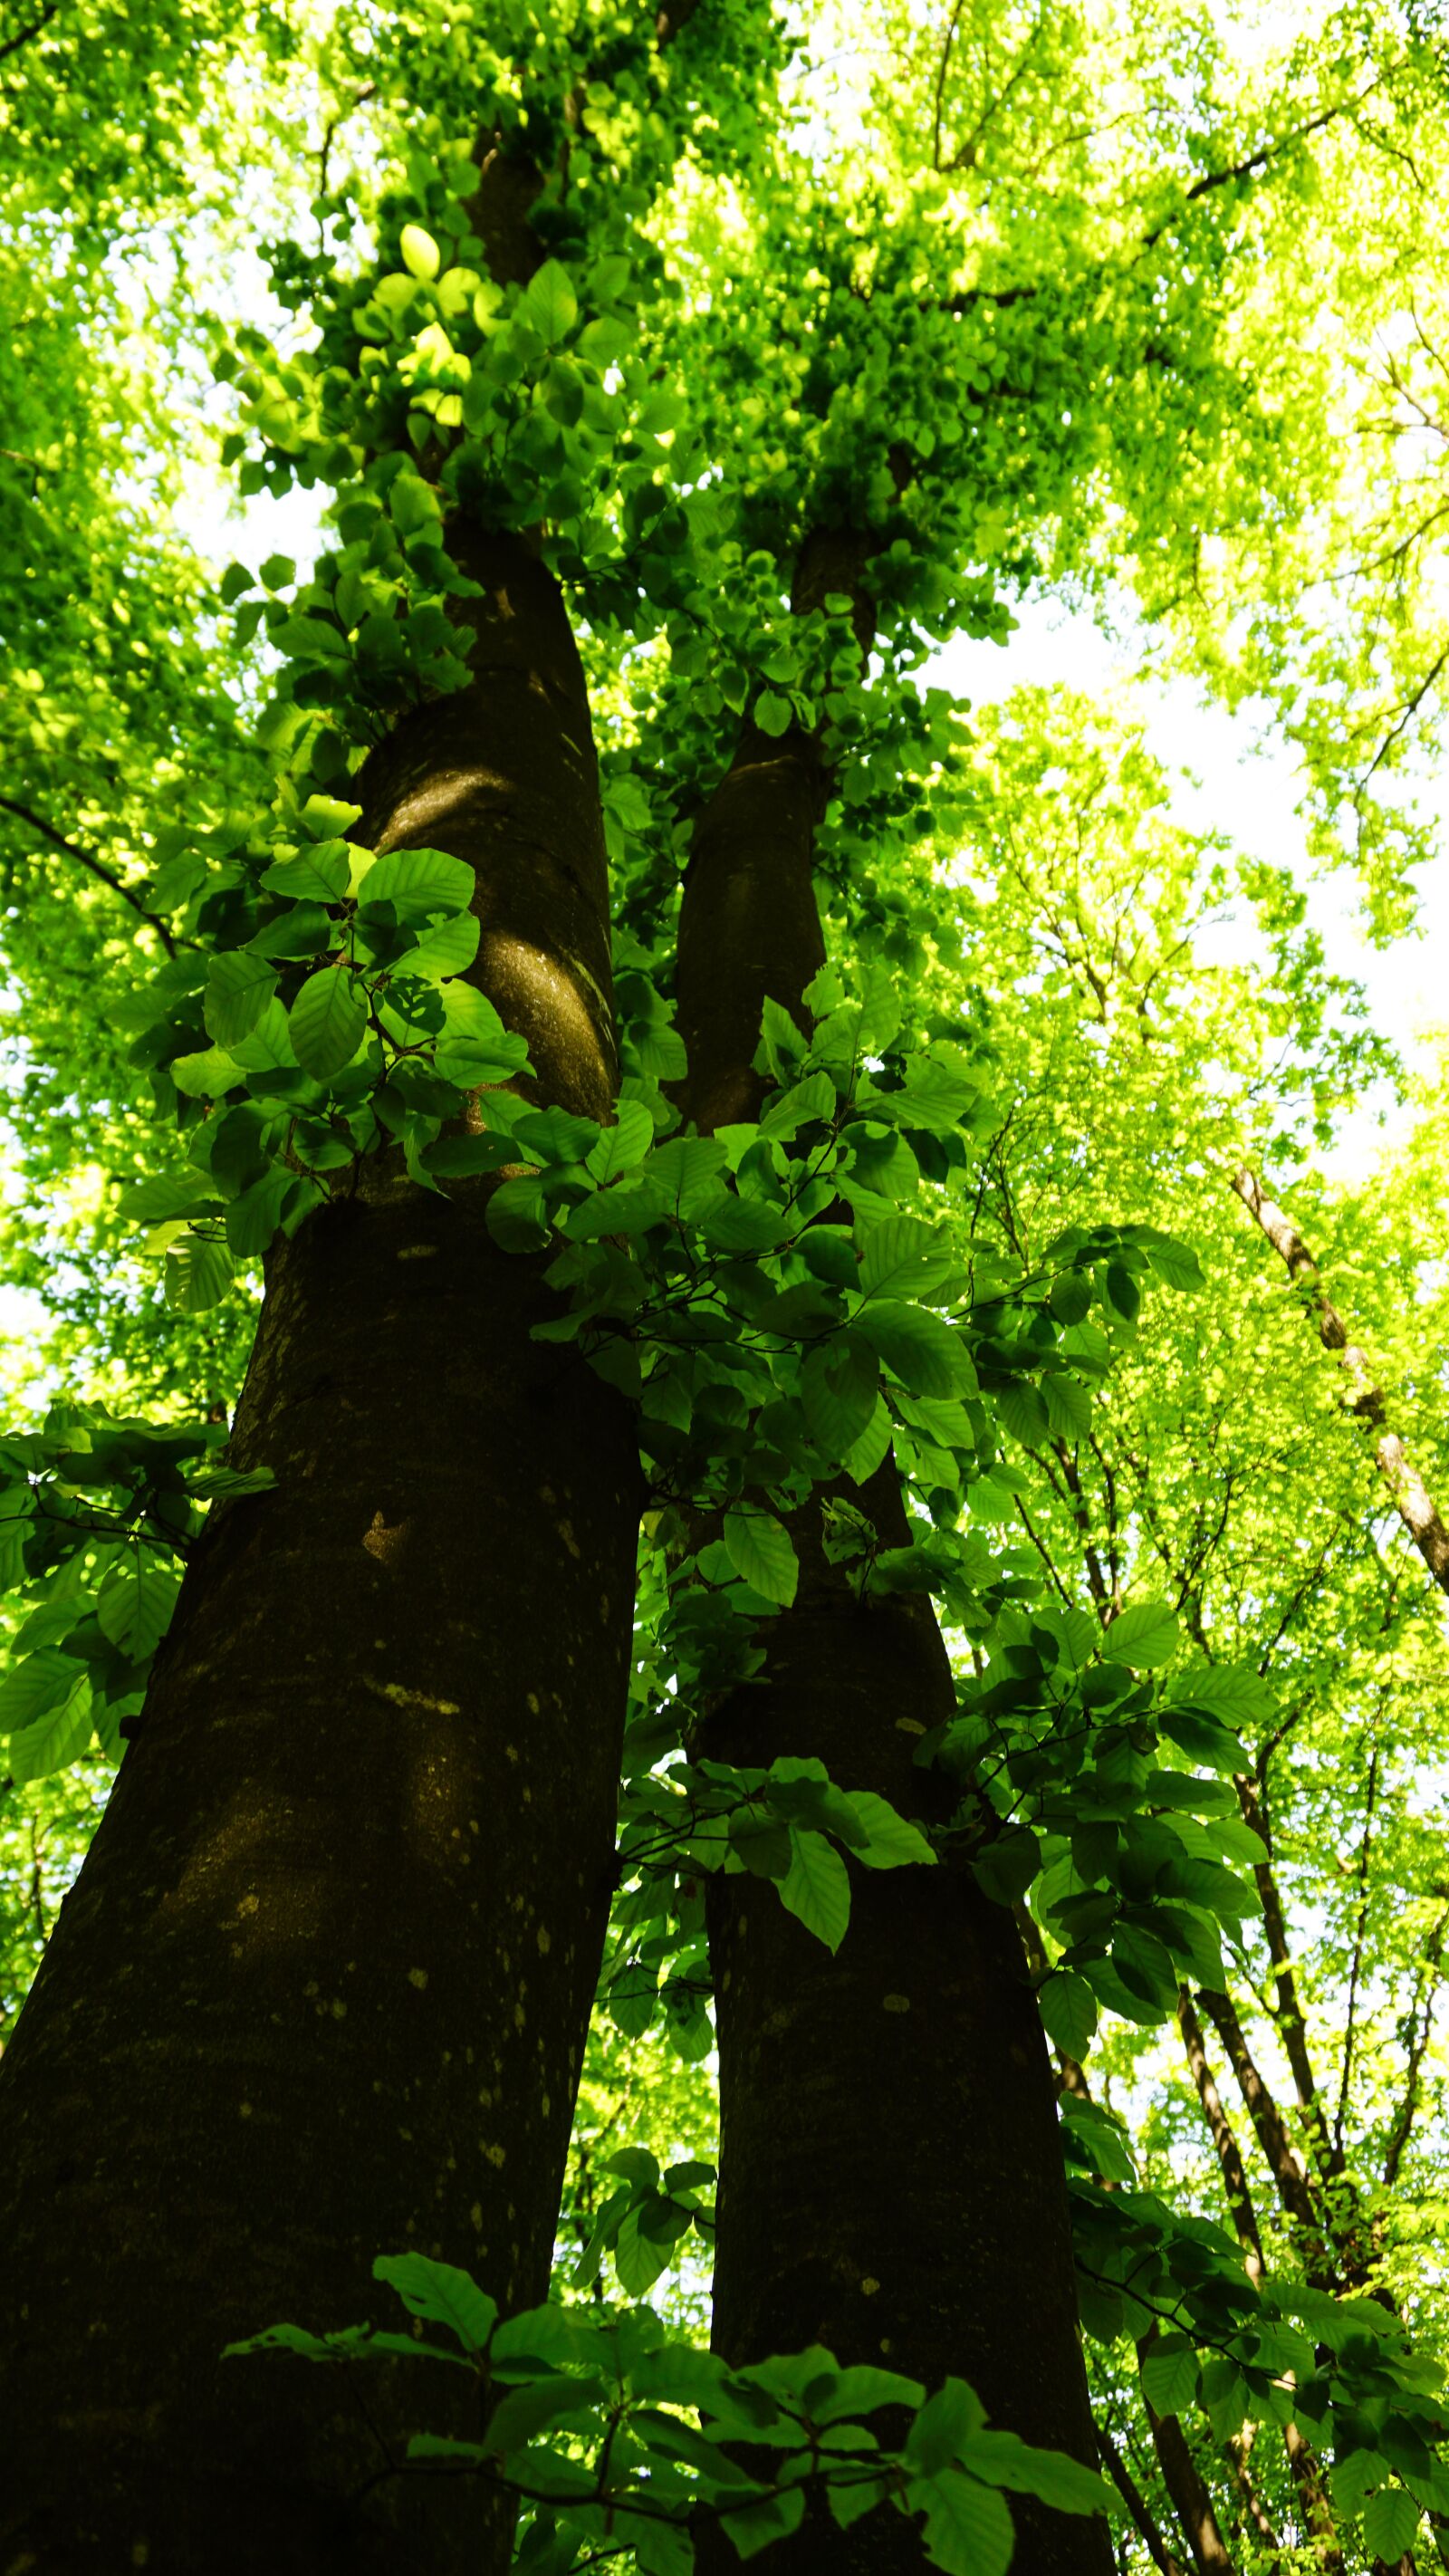 Sony a5100 sample photo. Trees, green, nature photography